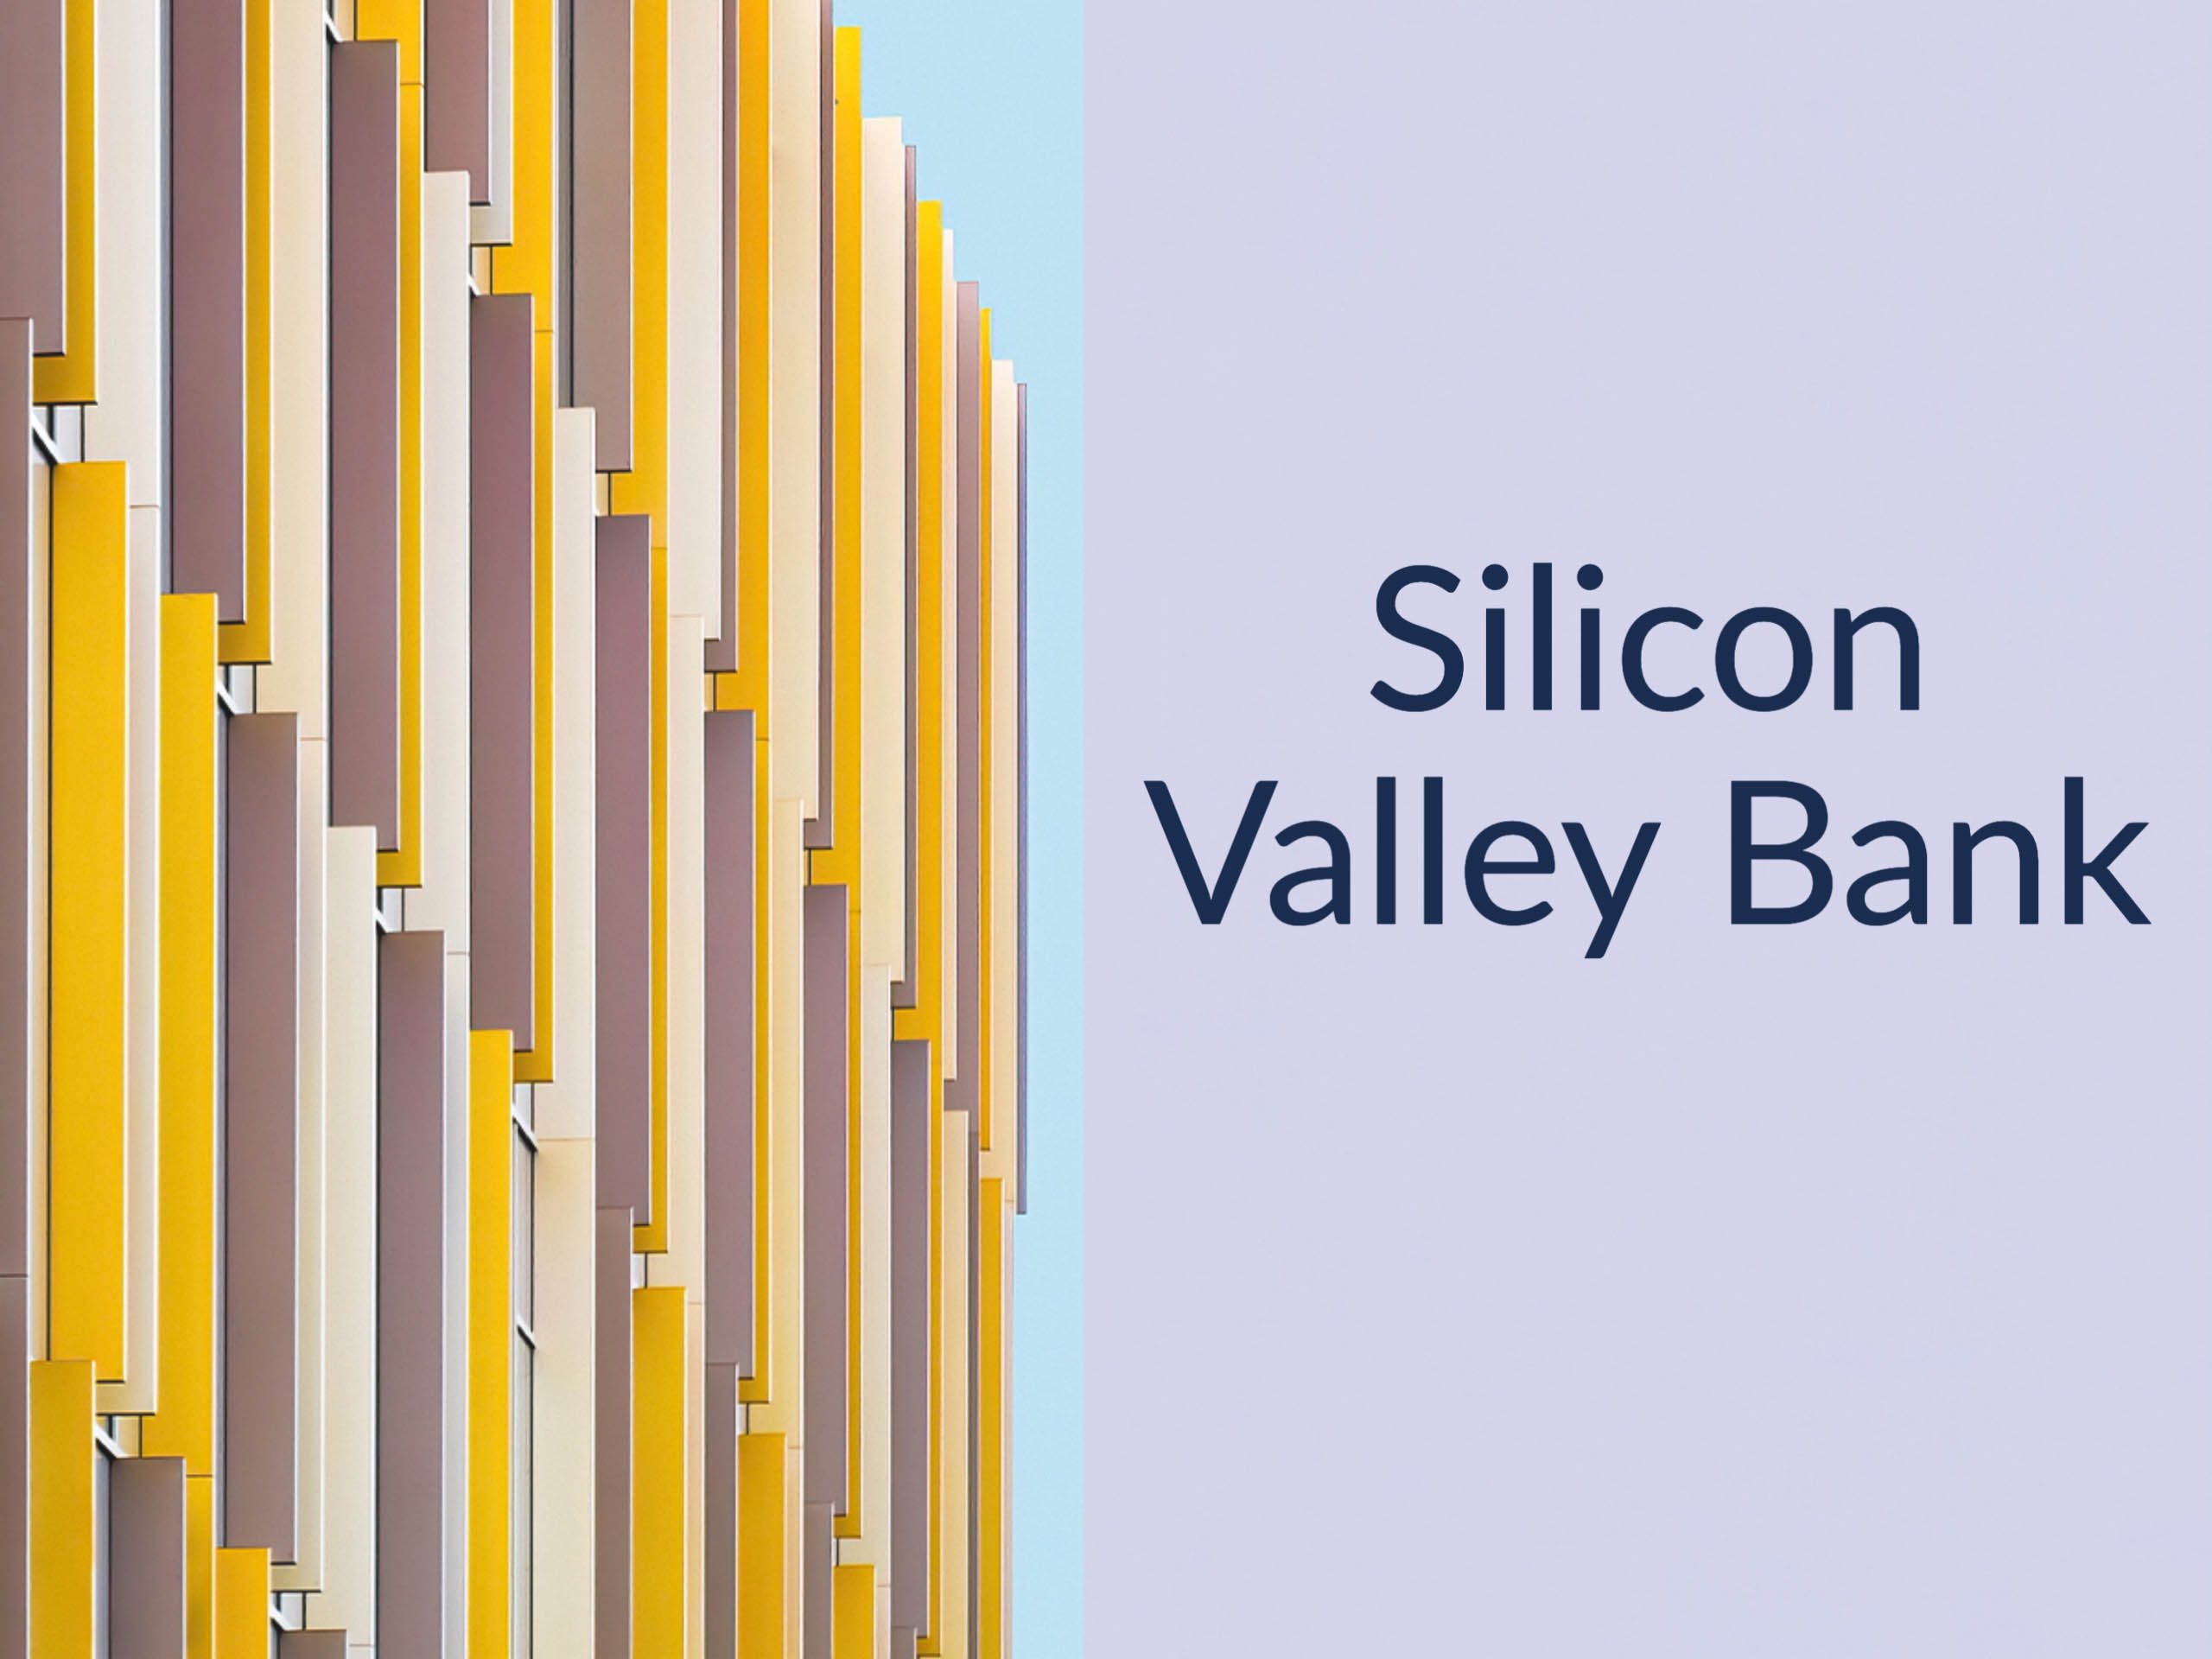 Colorful building with clear sky. Caption says "Silicon Valley Bank"